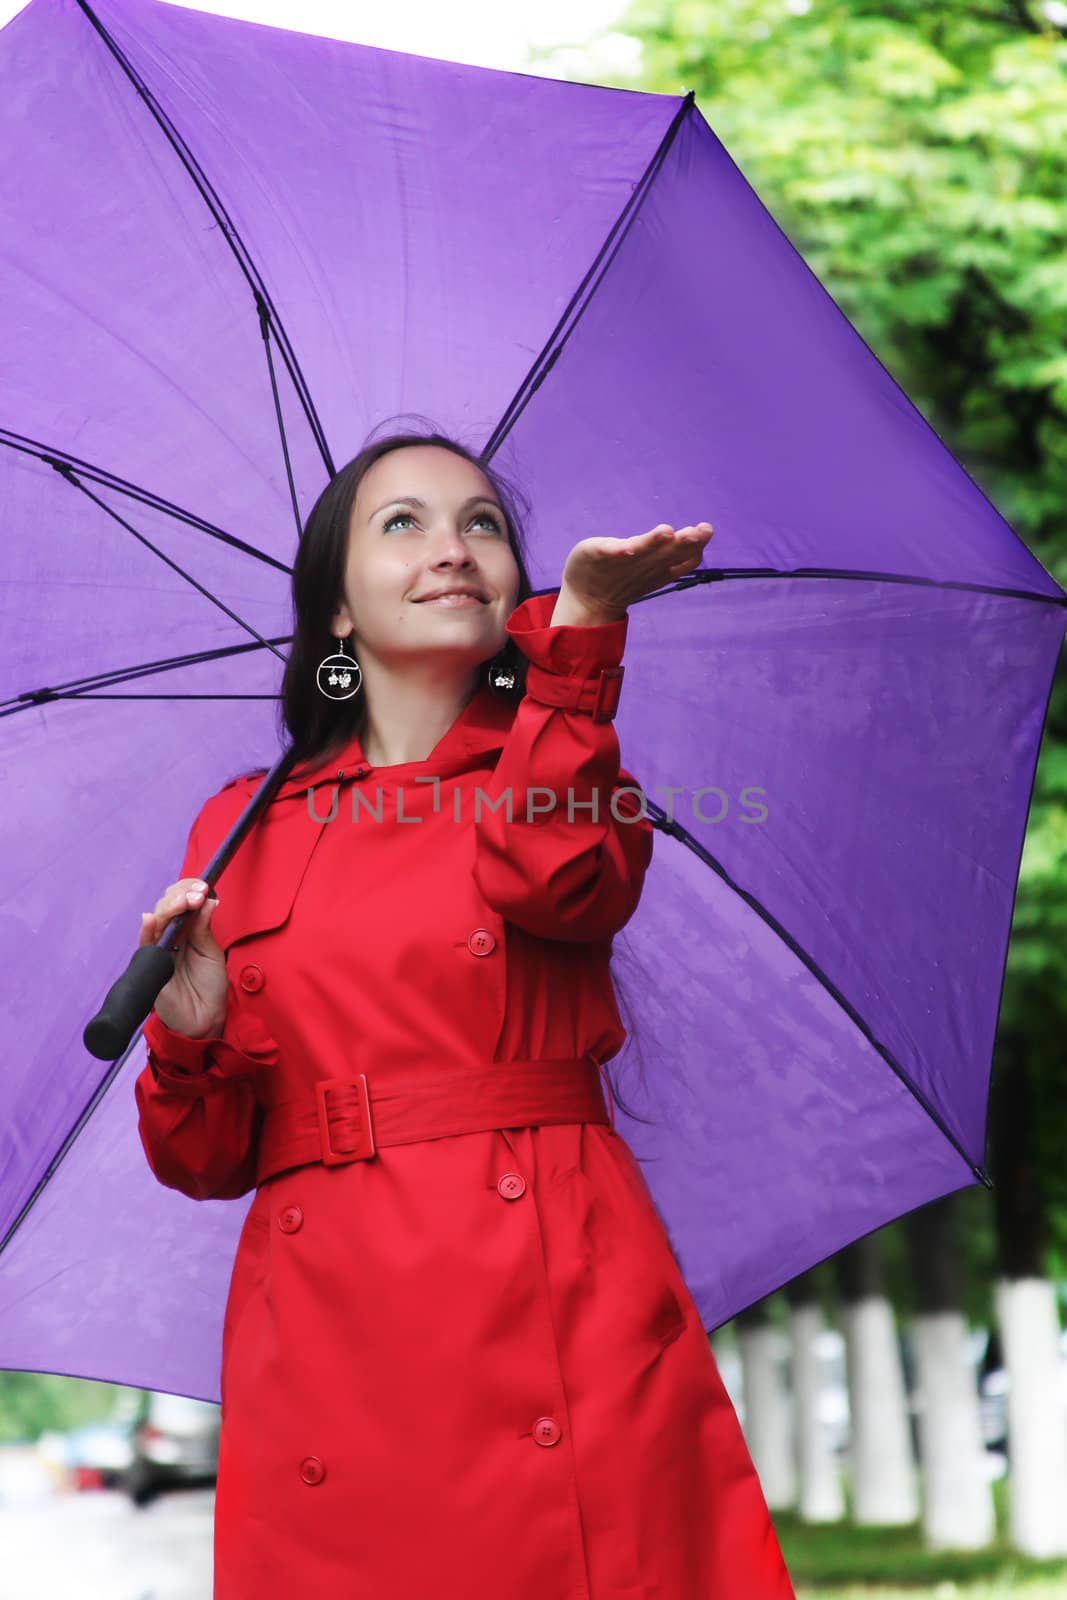 Woman with umbrella catching rain drops by Angel_a